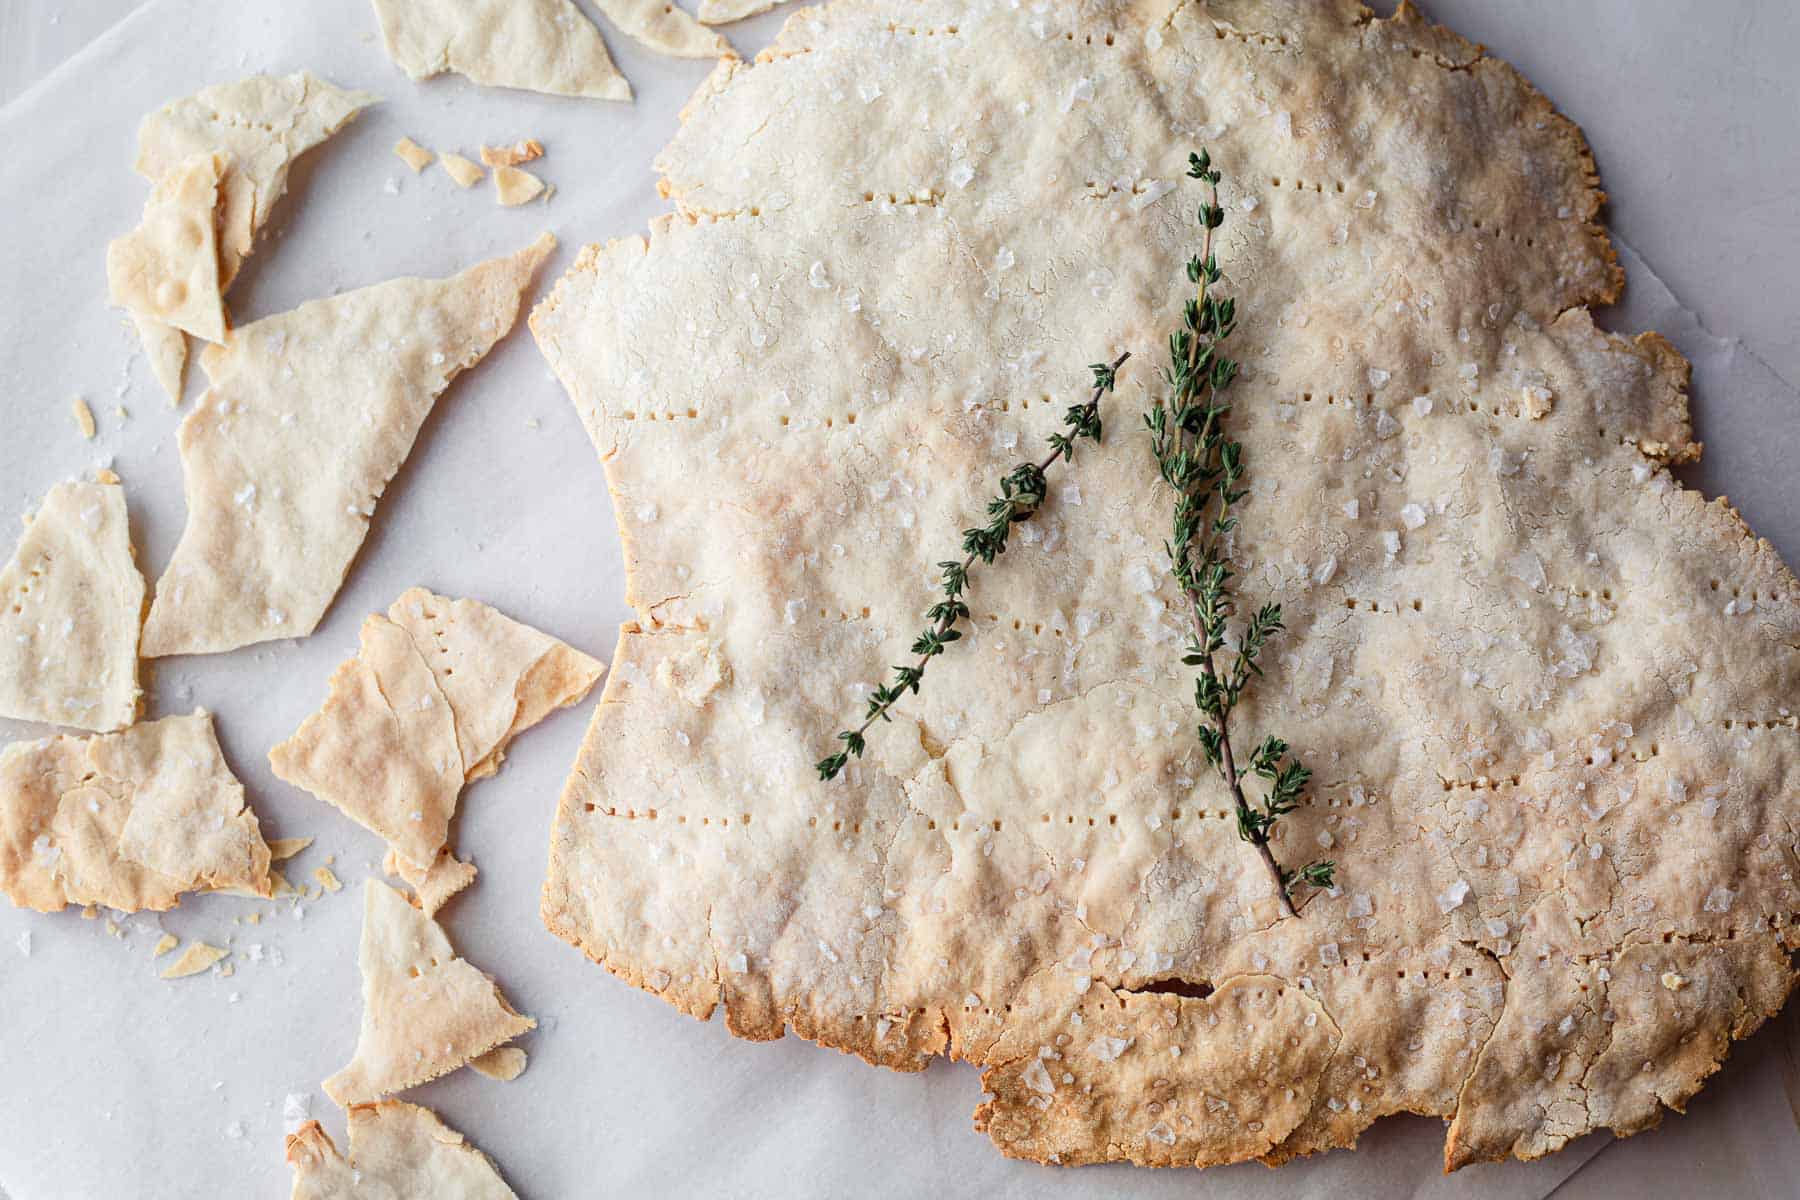 A large piece of gluten free matzo broken into smaller pieces. Topeed with a. thyme sprig.